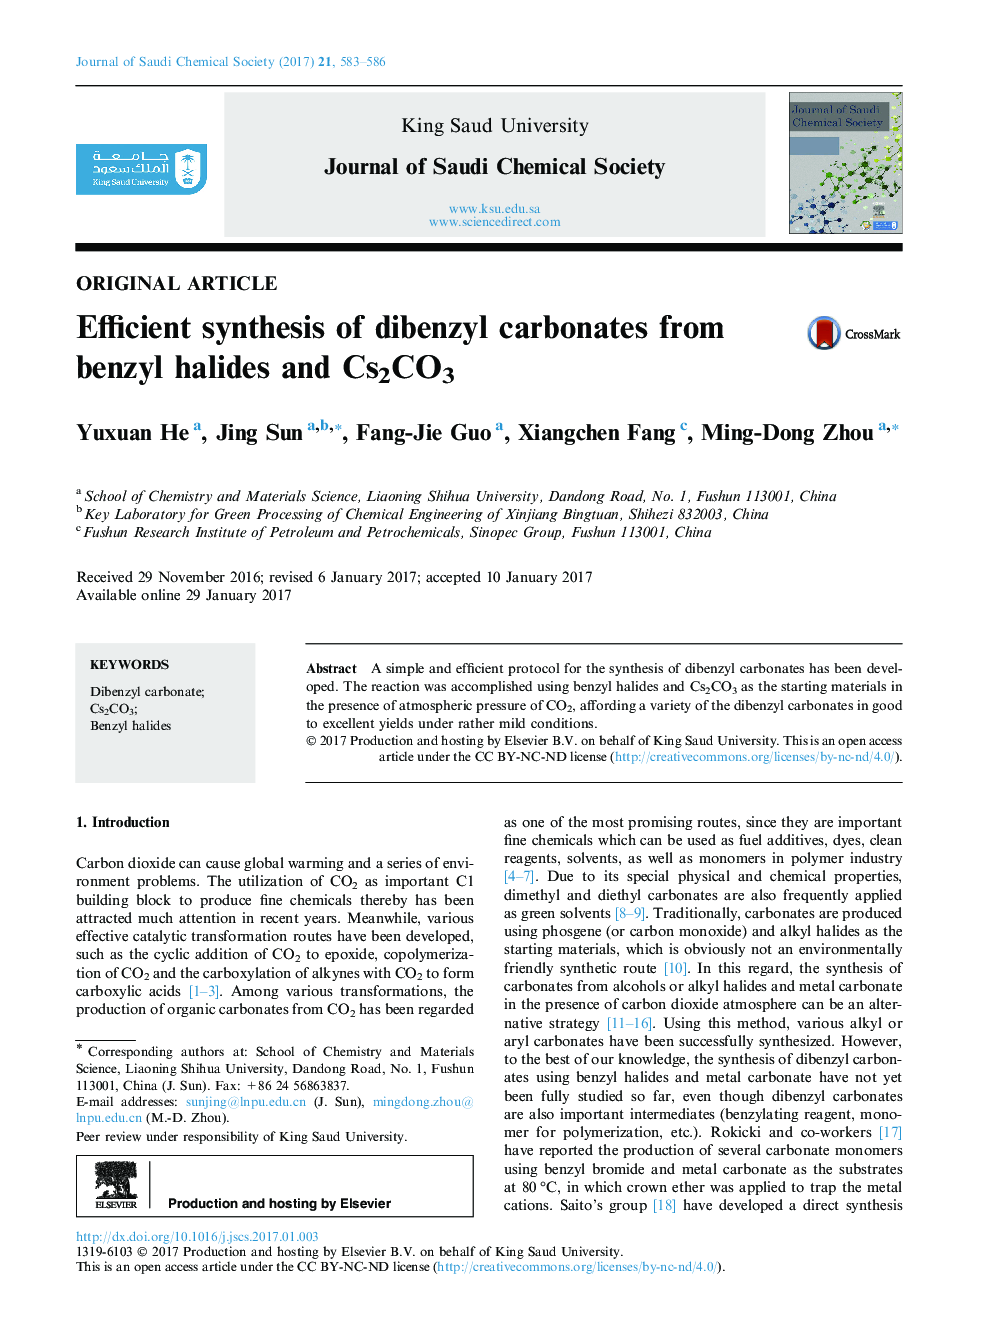 Efficient synthesis of dibenzyl carbonates from benzyl halides and Cs2CO3